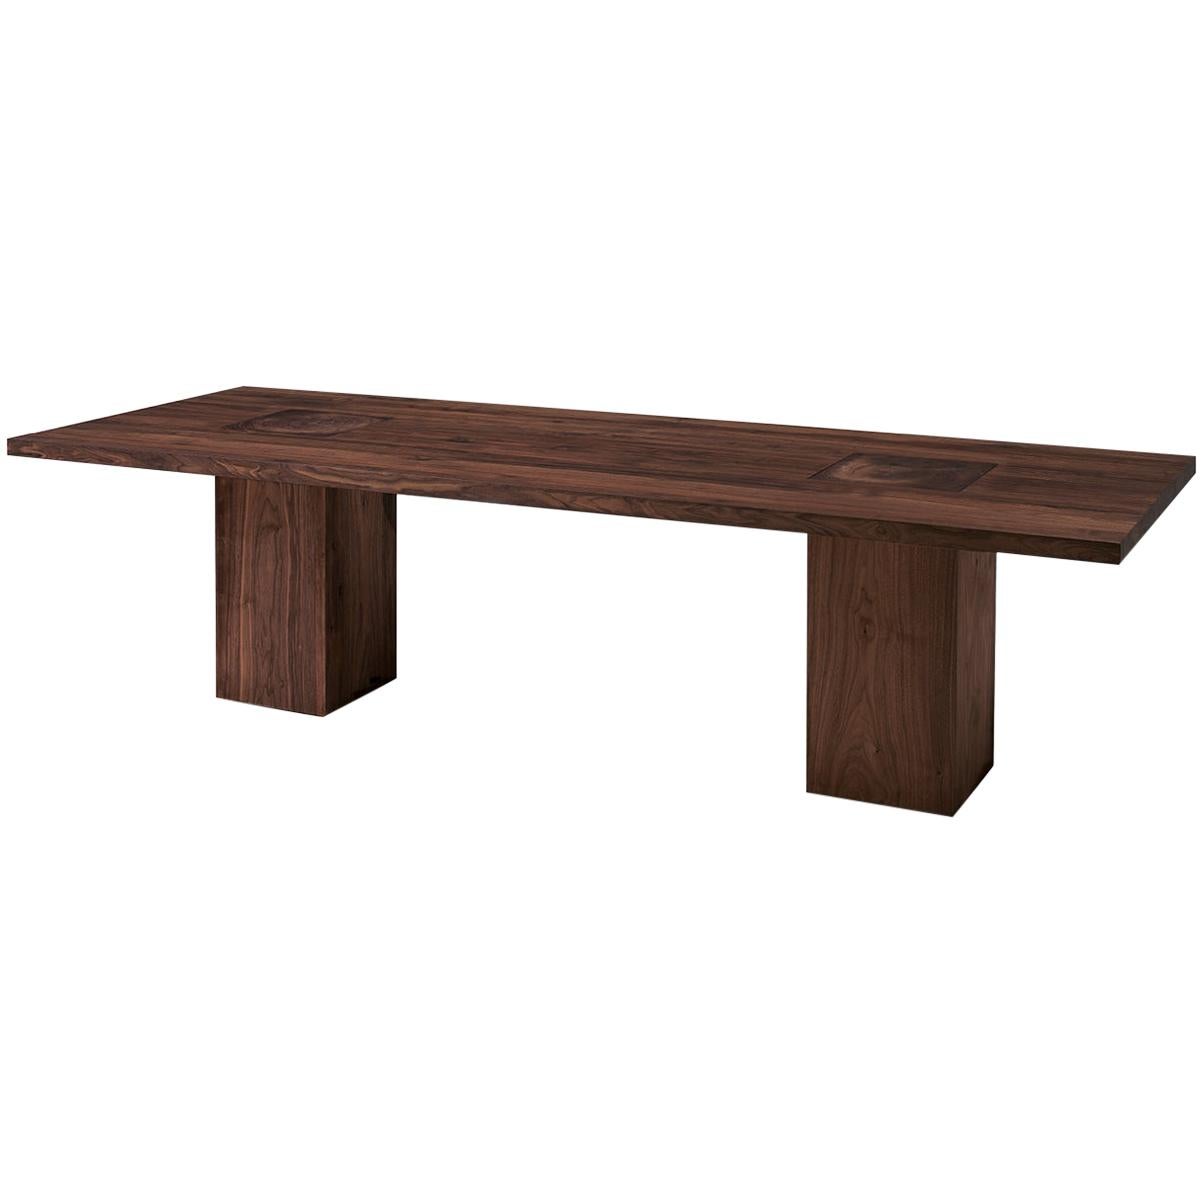 Full Wood Dining Table For Sale